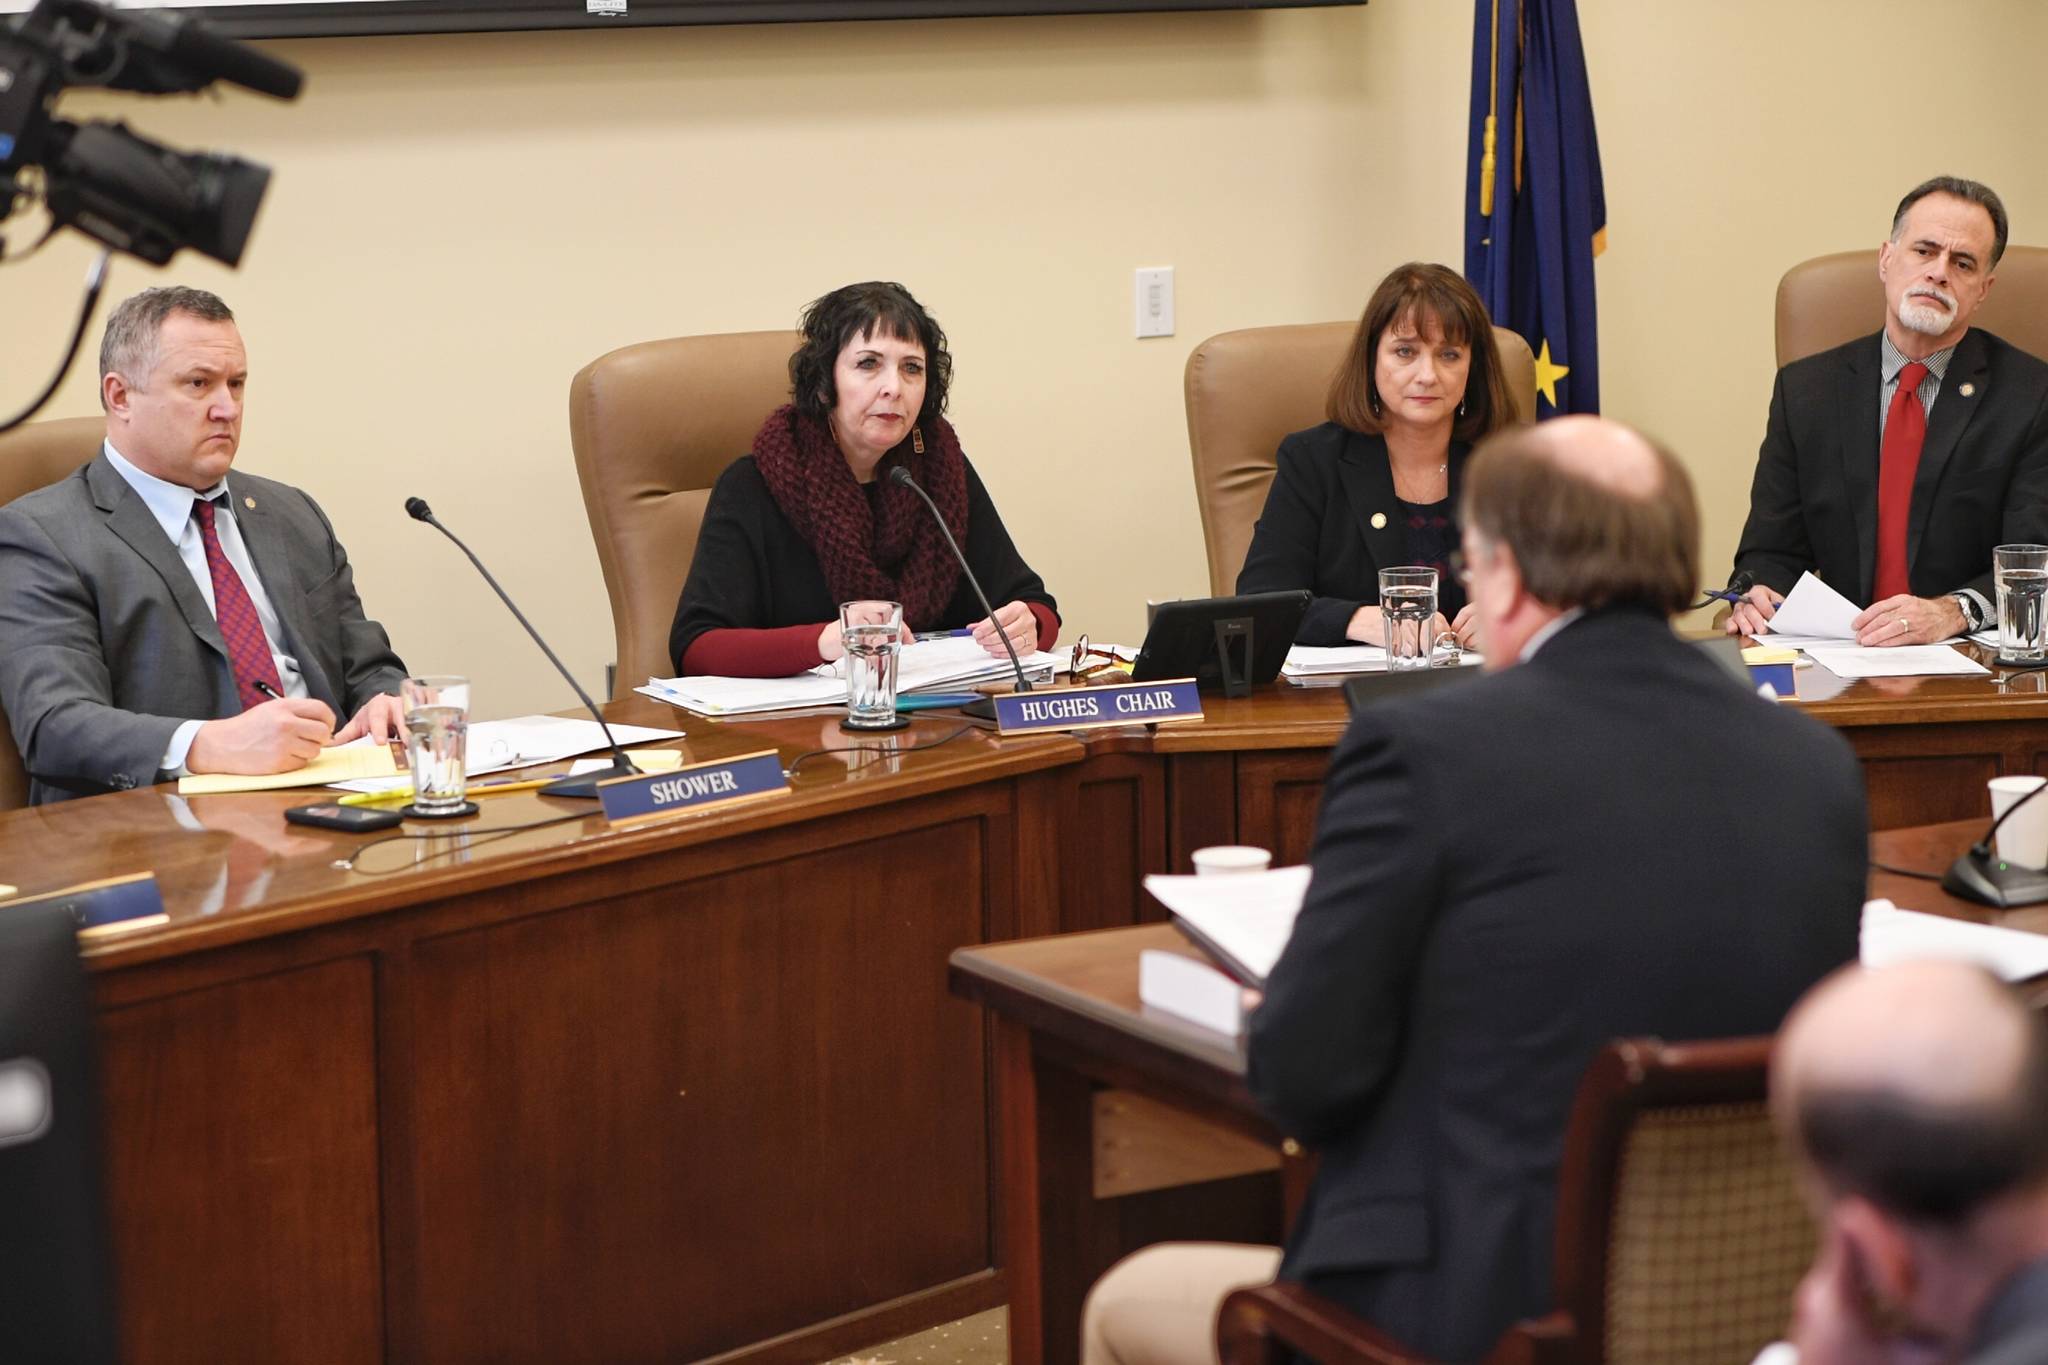 Members of the Senate Judiciary Committee, Sen. Mike Shower, R-Wasilla, left, Sen. Shelley Hughes, R-Wasilla, Sen. Lora Reinbold, R-Eagle River, and Sen. Peter Micciche, R-Soldotna, right, listen Attorney General Kevin Clarkson speak about Gov. Mike Dunleavy’s dour crime bills at the Capitol on Wednesday, Feb. 6, 2019. (Michael Penn | Juneau Empire)